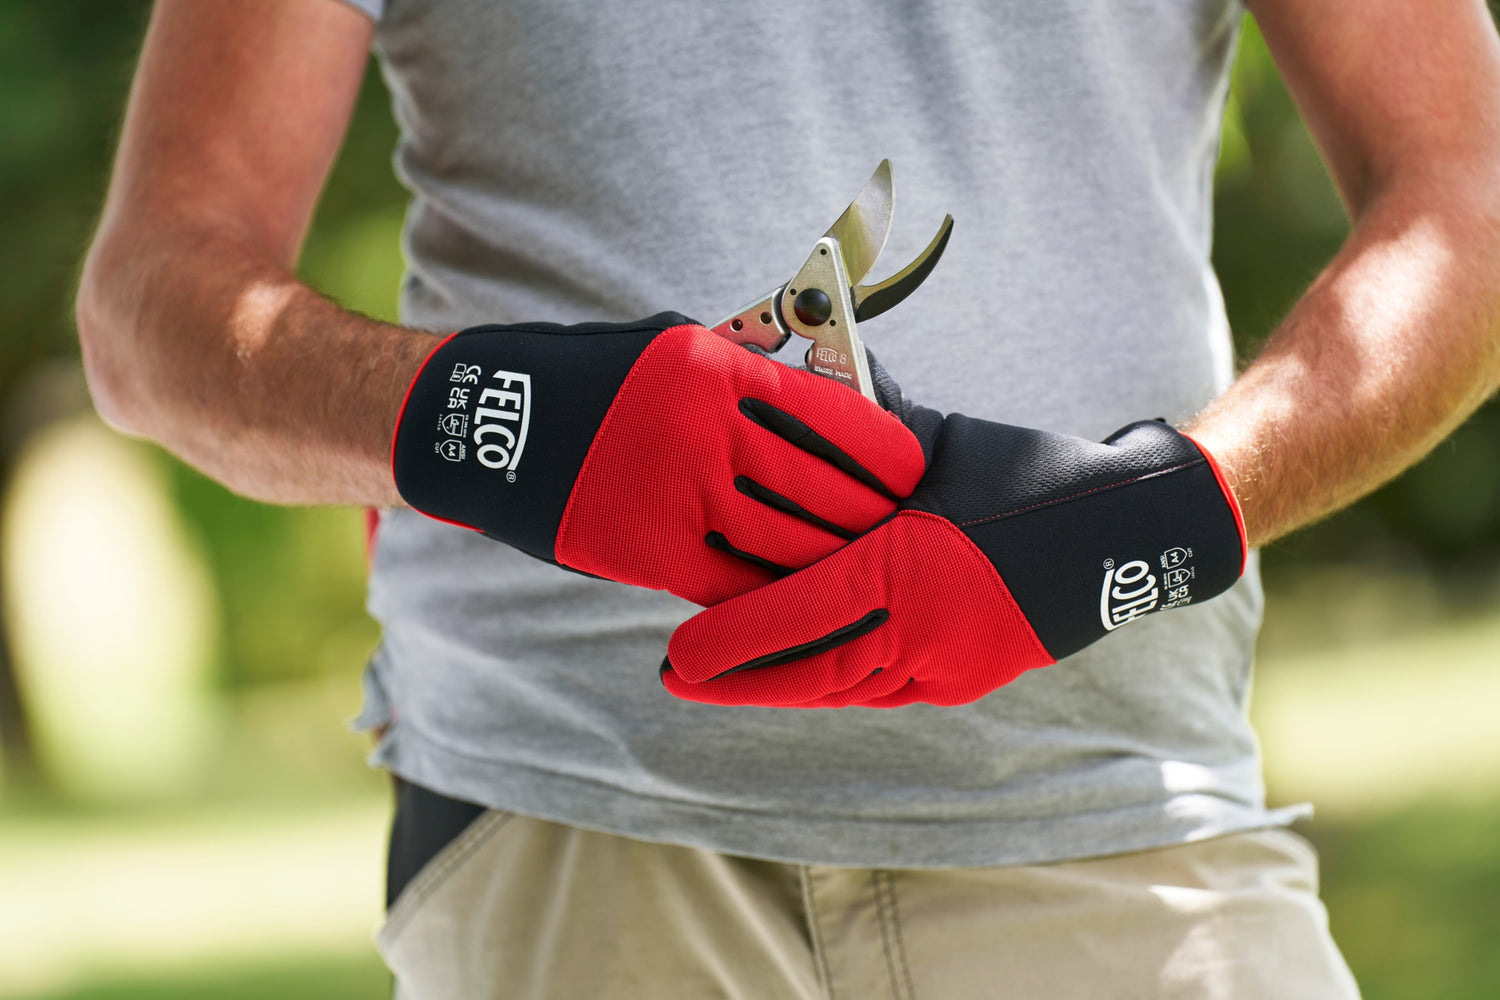 FELCO expands its Personal Protection Equipment (PPE) Range